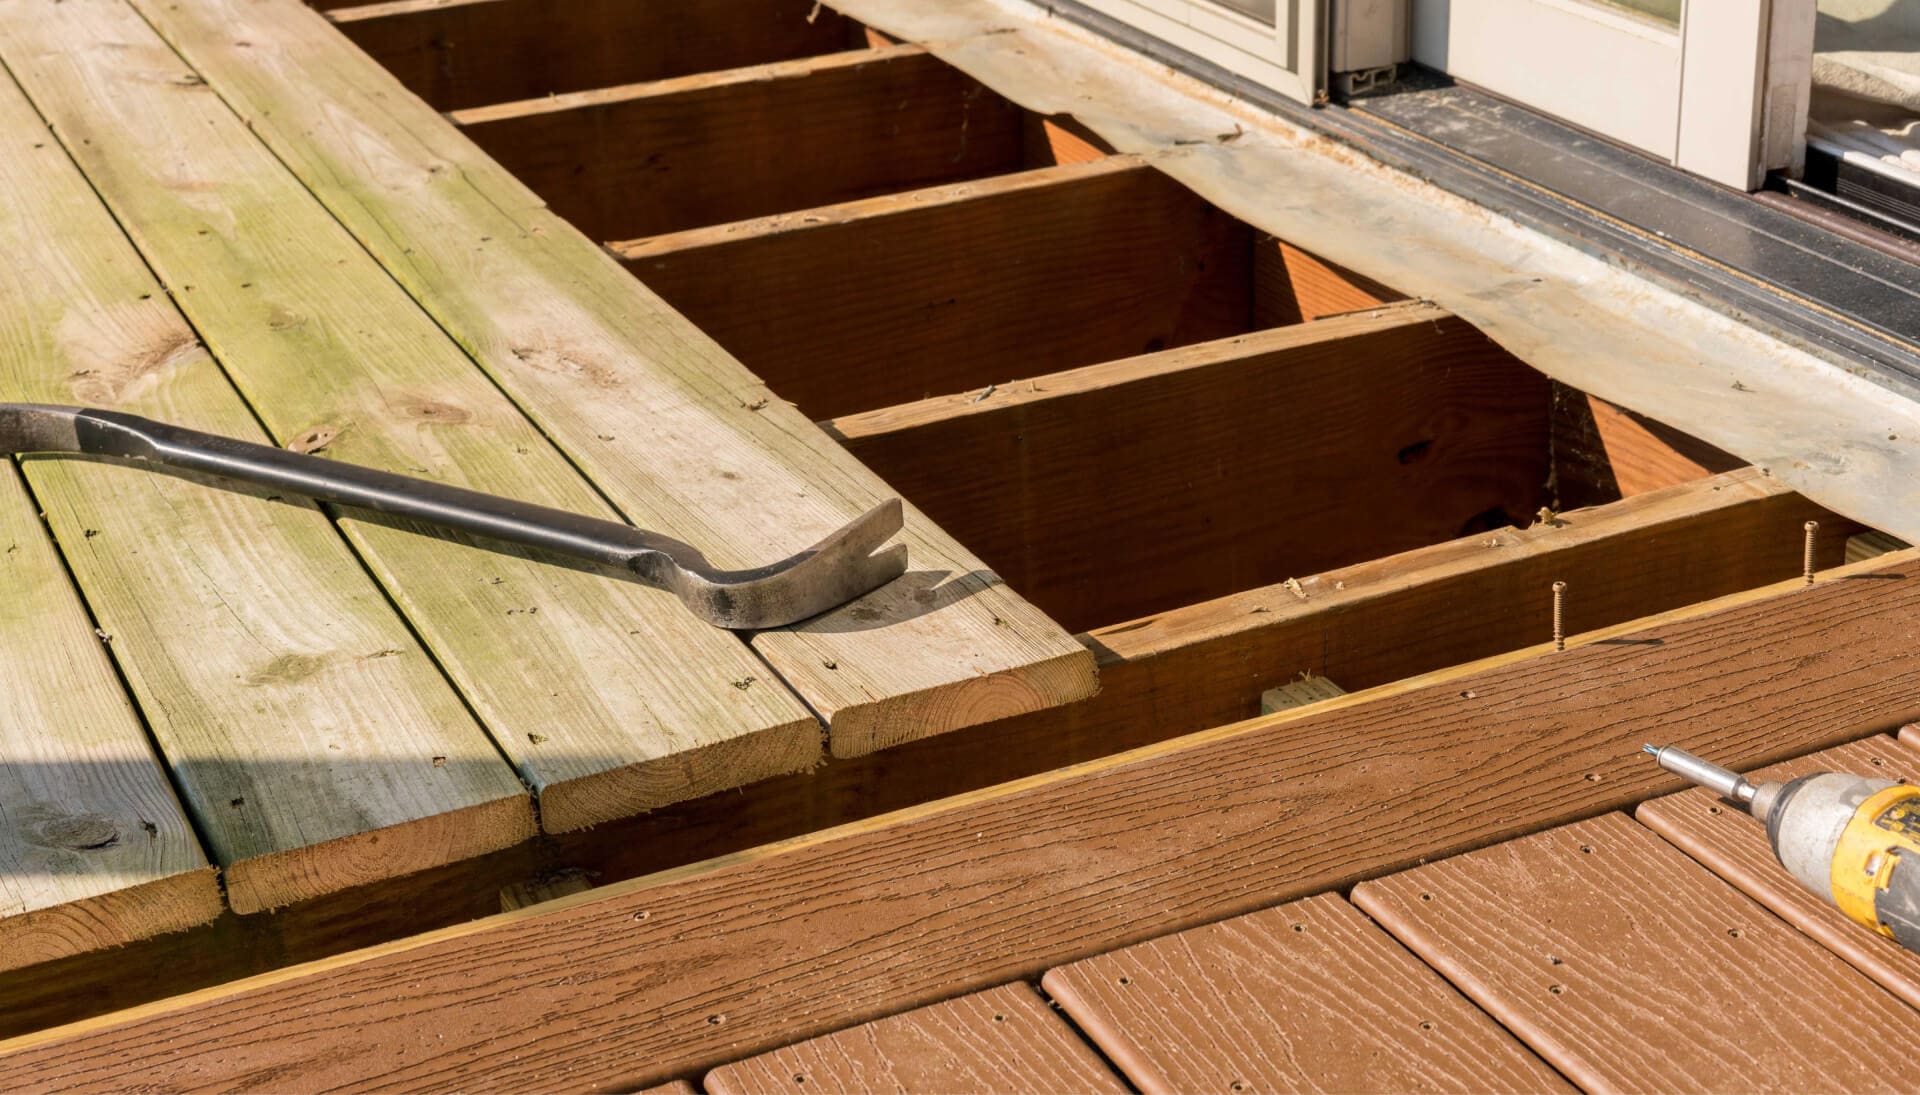 We offer the best deck repair services in Tulsa, OK